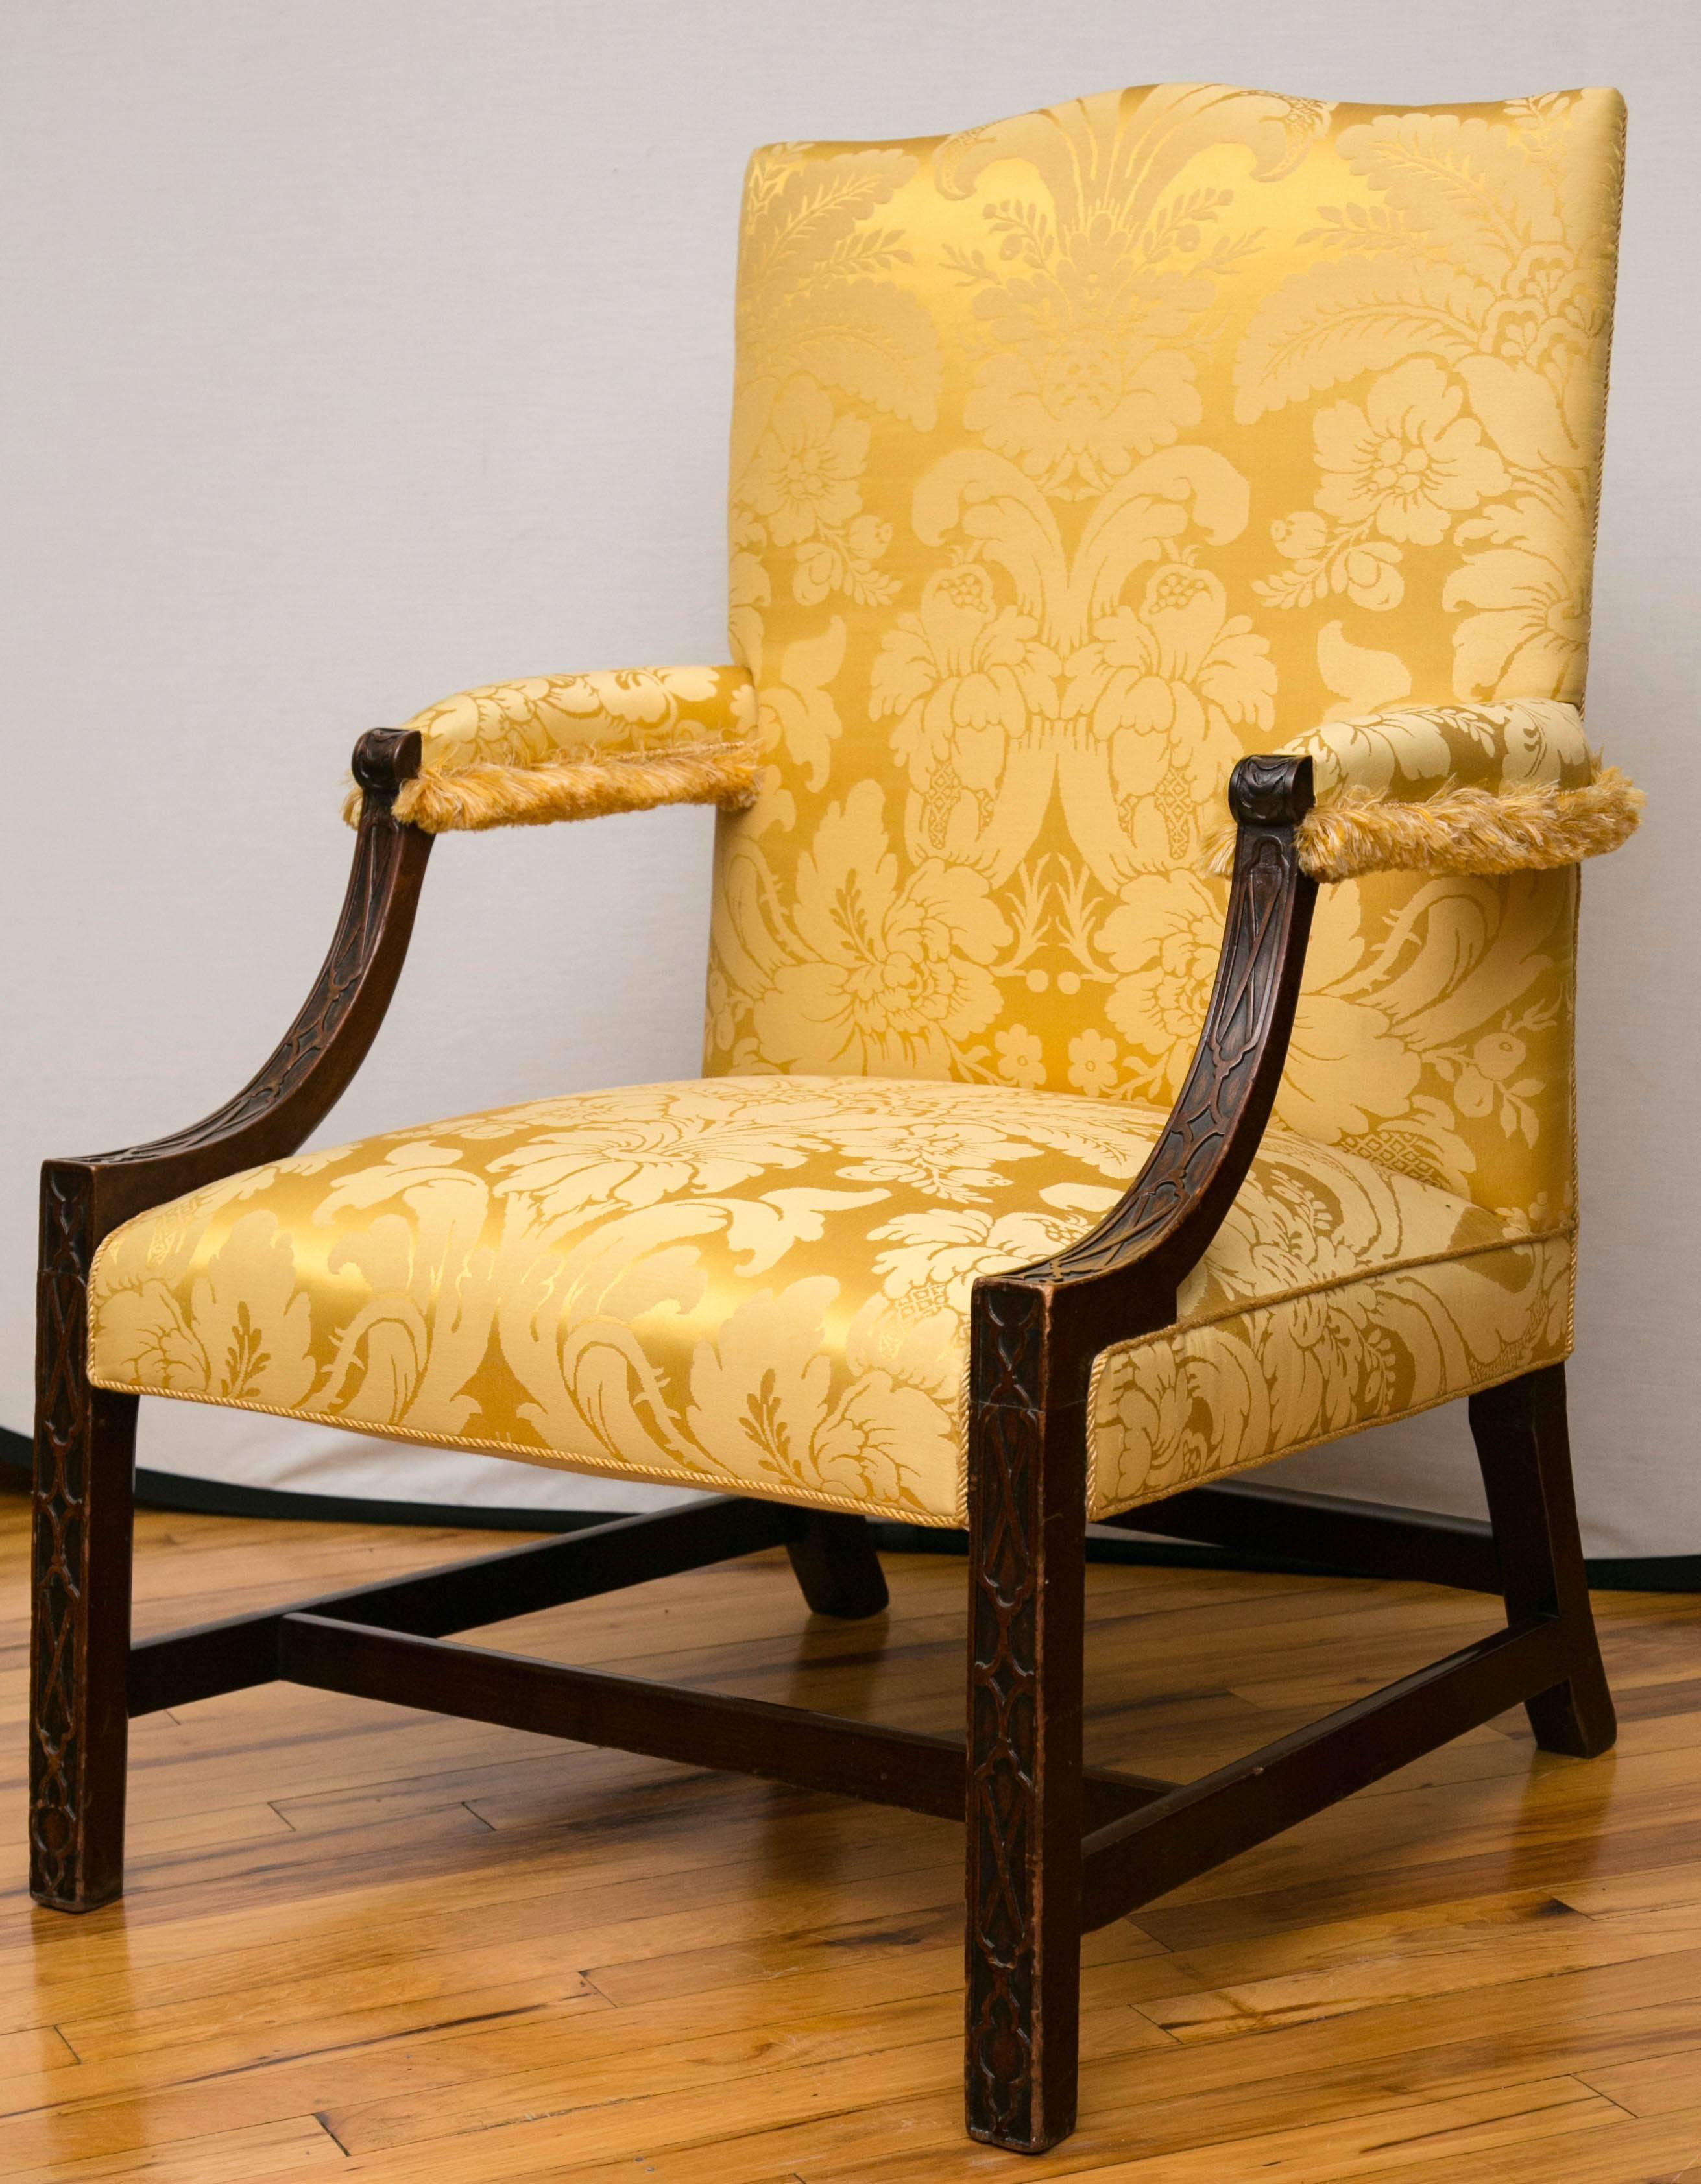 A mid-18th century George III period mahogany Gainsborough armchair, having set back filigree design arms supported on square legs with stretchers.